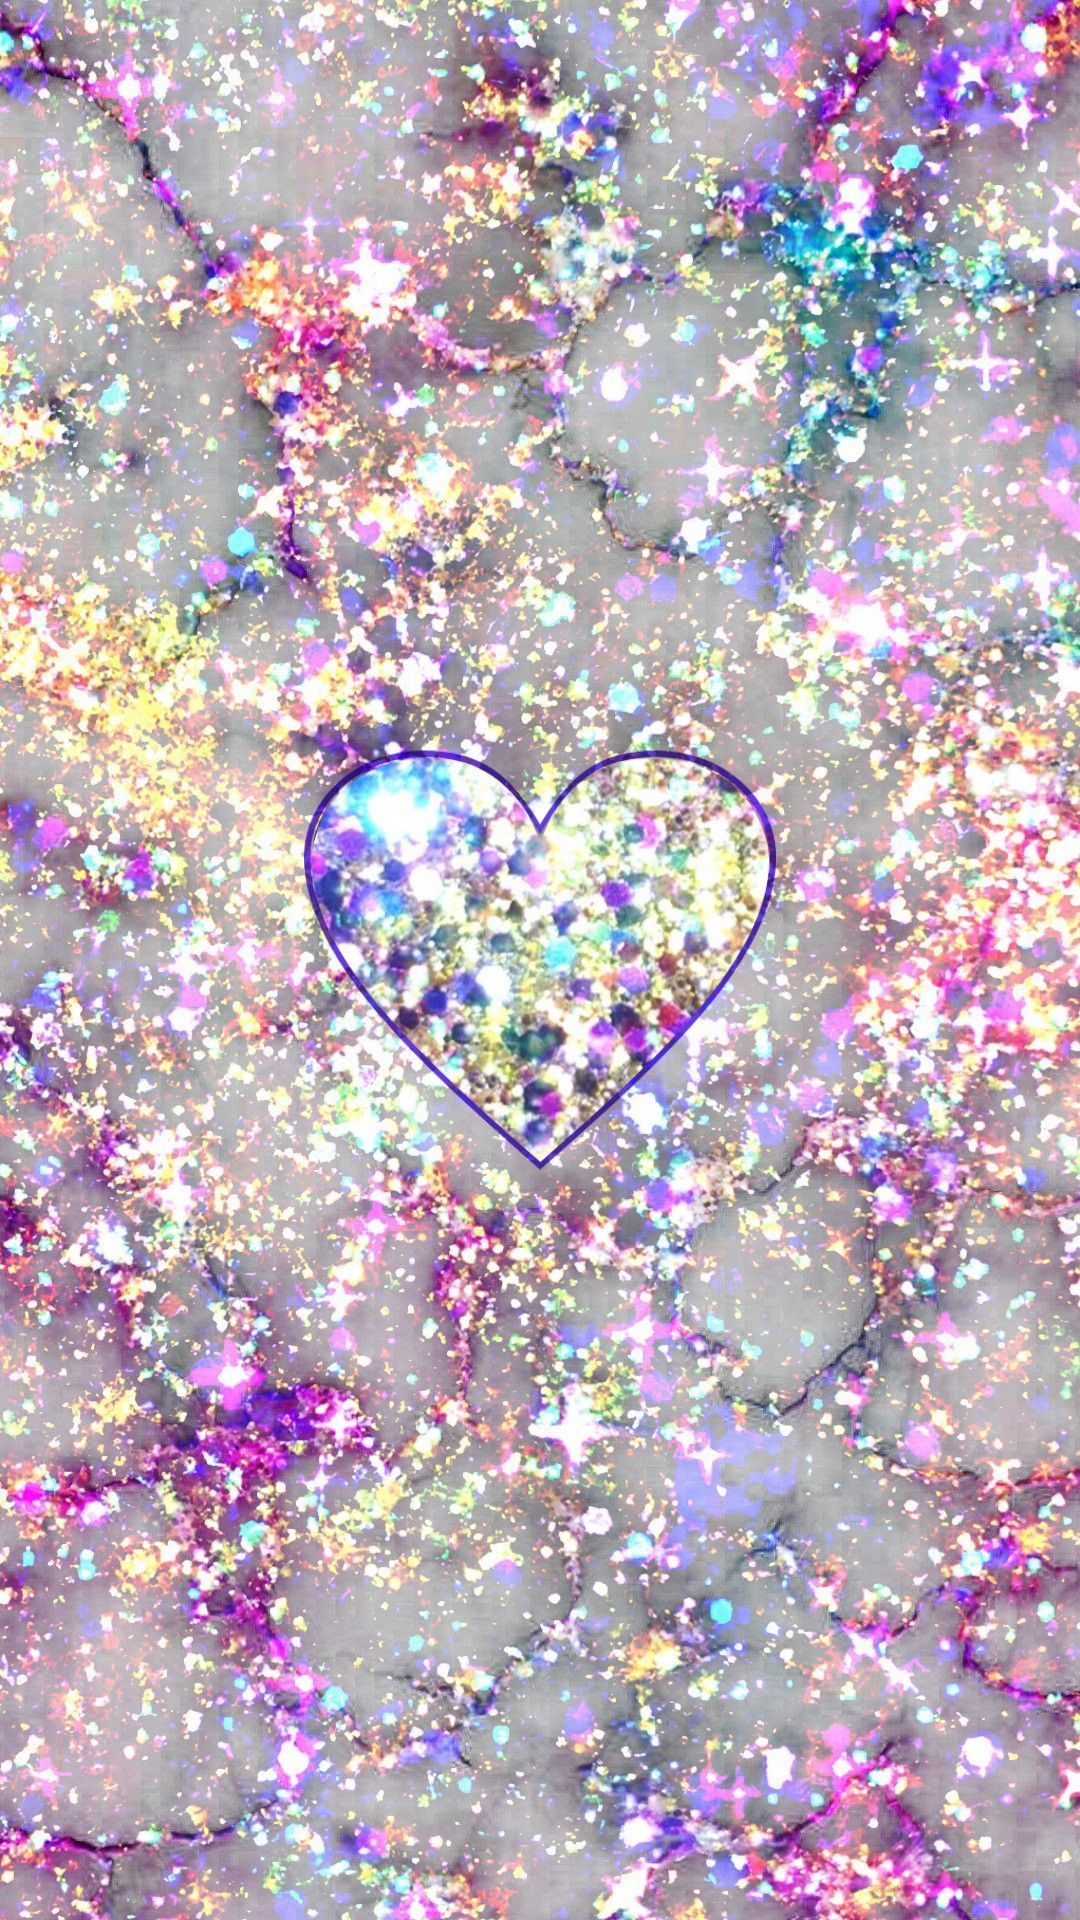 Glittery Marble Heart, made by me #purple #sparkly #wallpaper #background #sparkles. iPhone wallpaper glitter, Heart iphone wallpaper, Glitter phone wallpaper